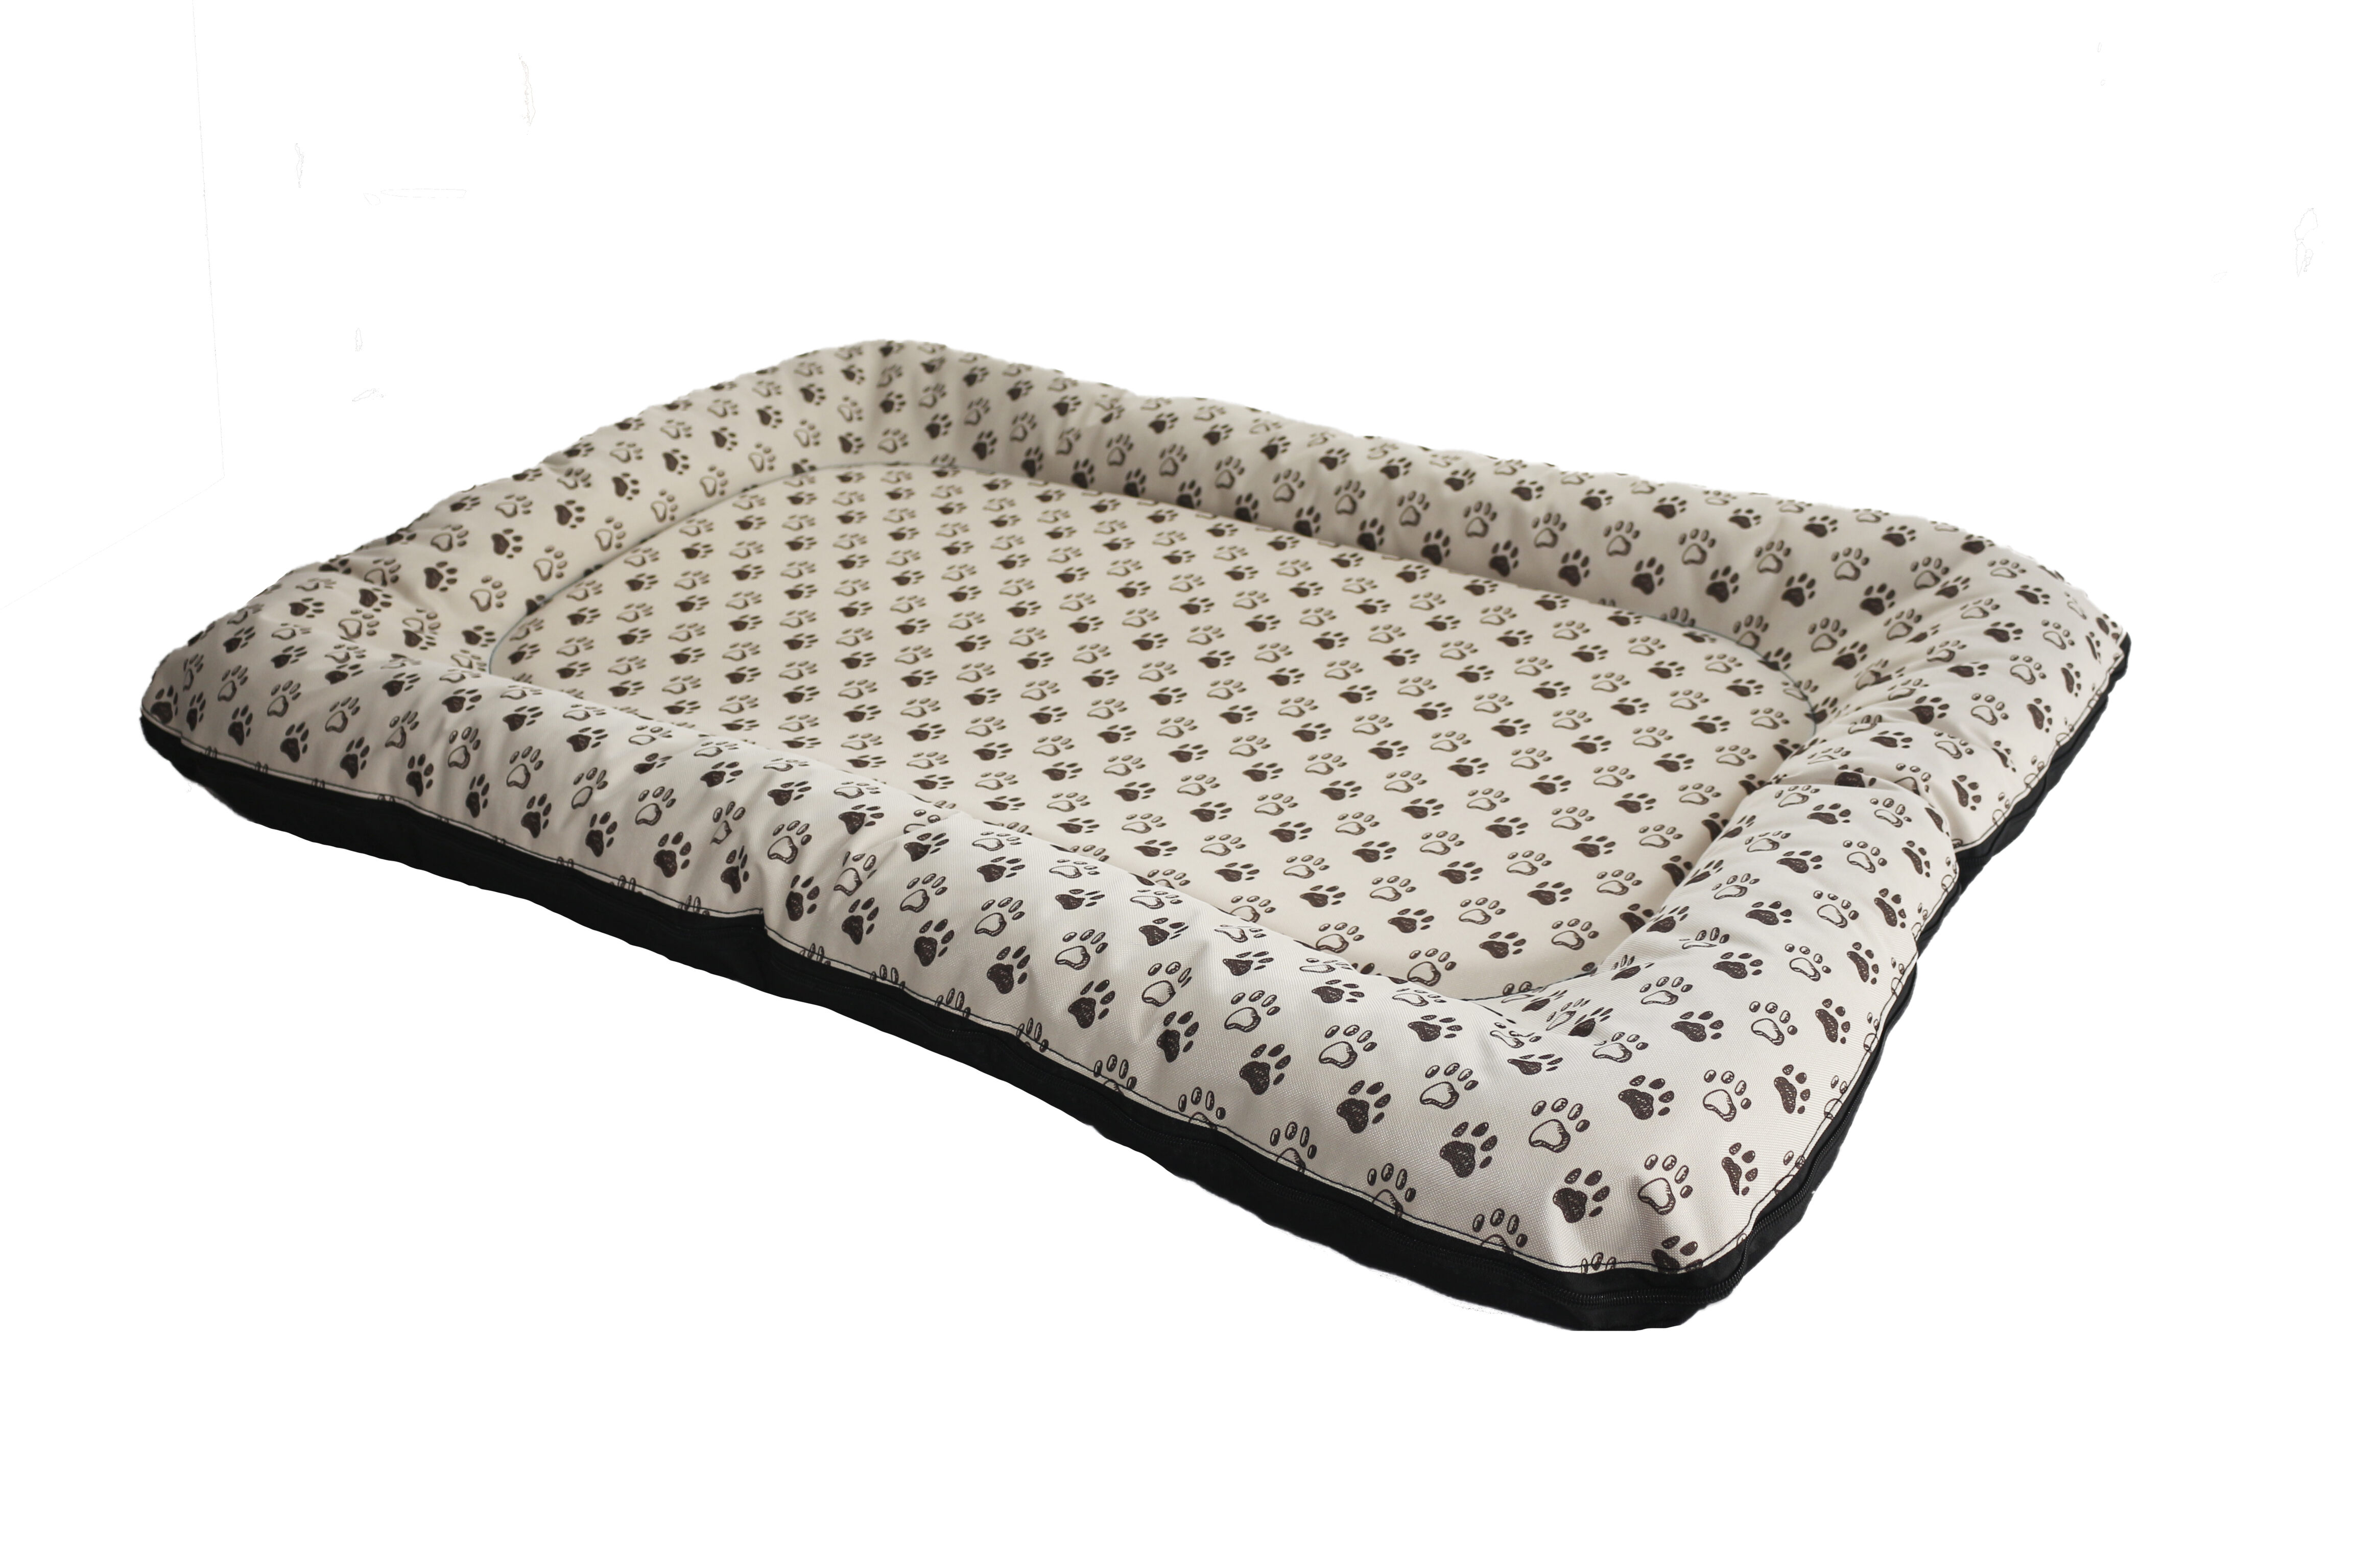 Rajen mattress for dogs, 6 sizes from 64x40 cm, motif P-23